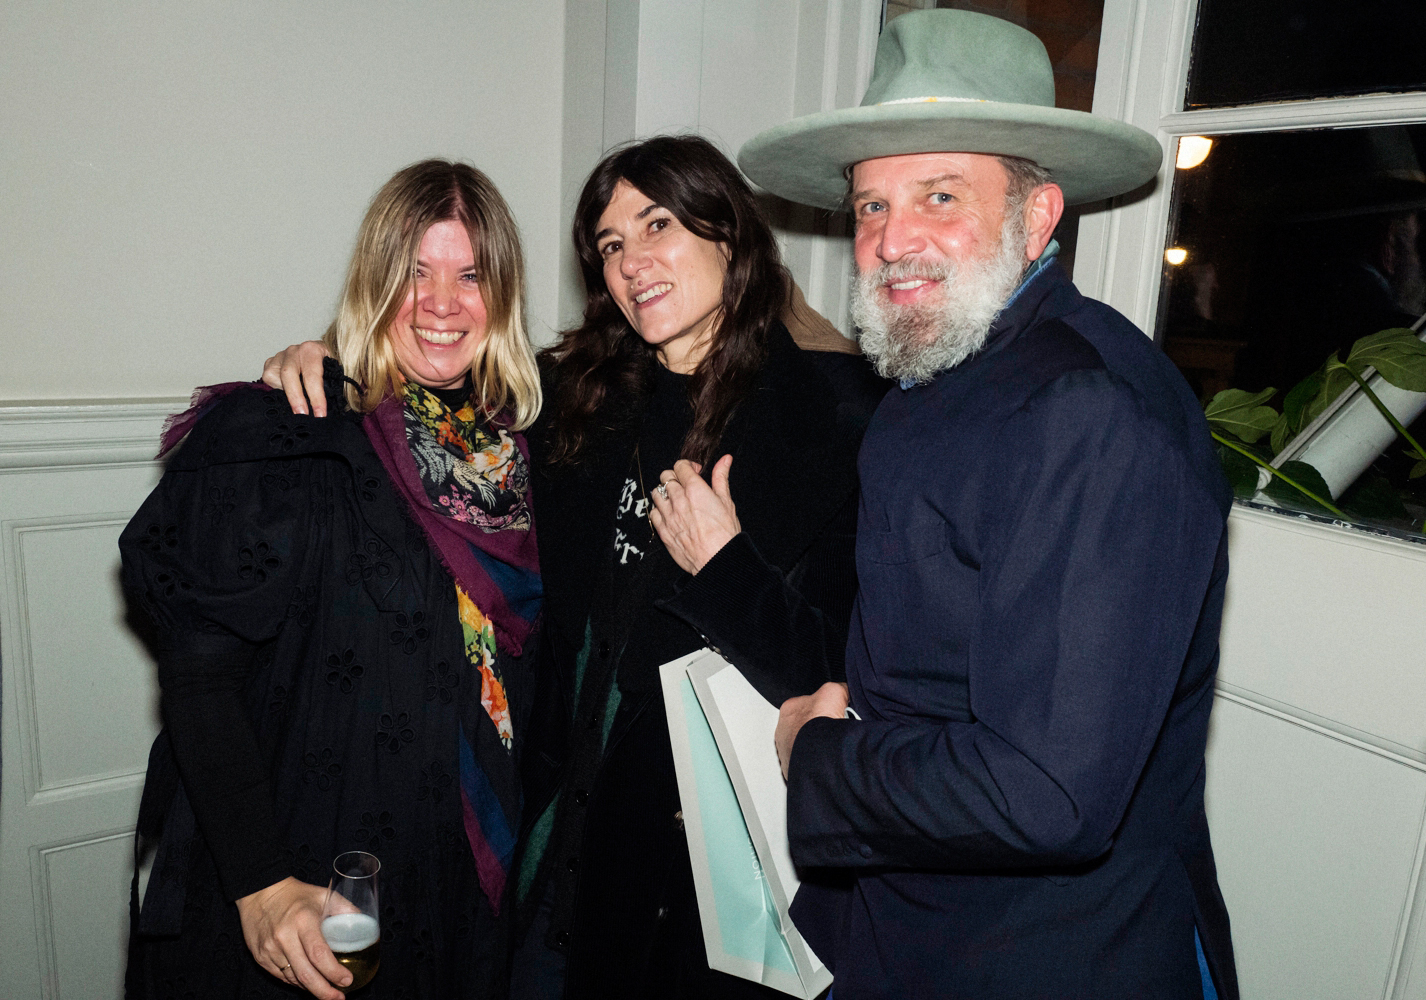 Jess Christie, Bella Freud and Robert Rabensteiner at the Annie Leibovitz Wonderland book launch at MATCHESFASHION, 3 Carlos Place, London - photo by James D. Kelly